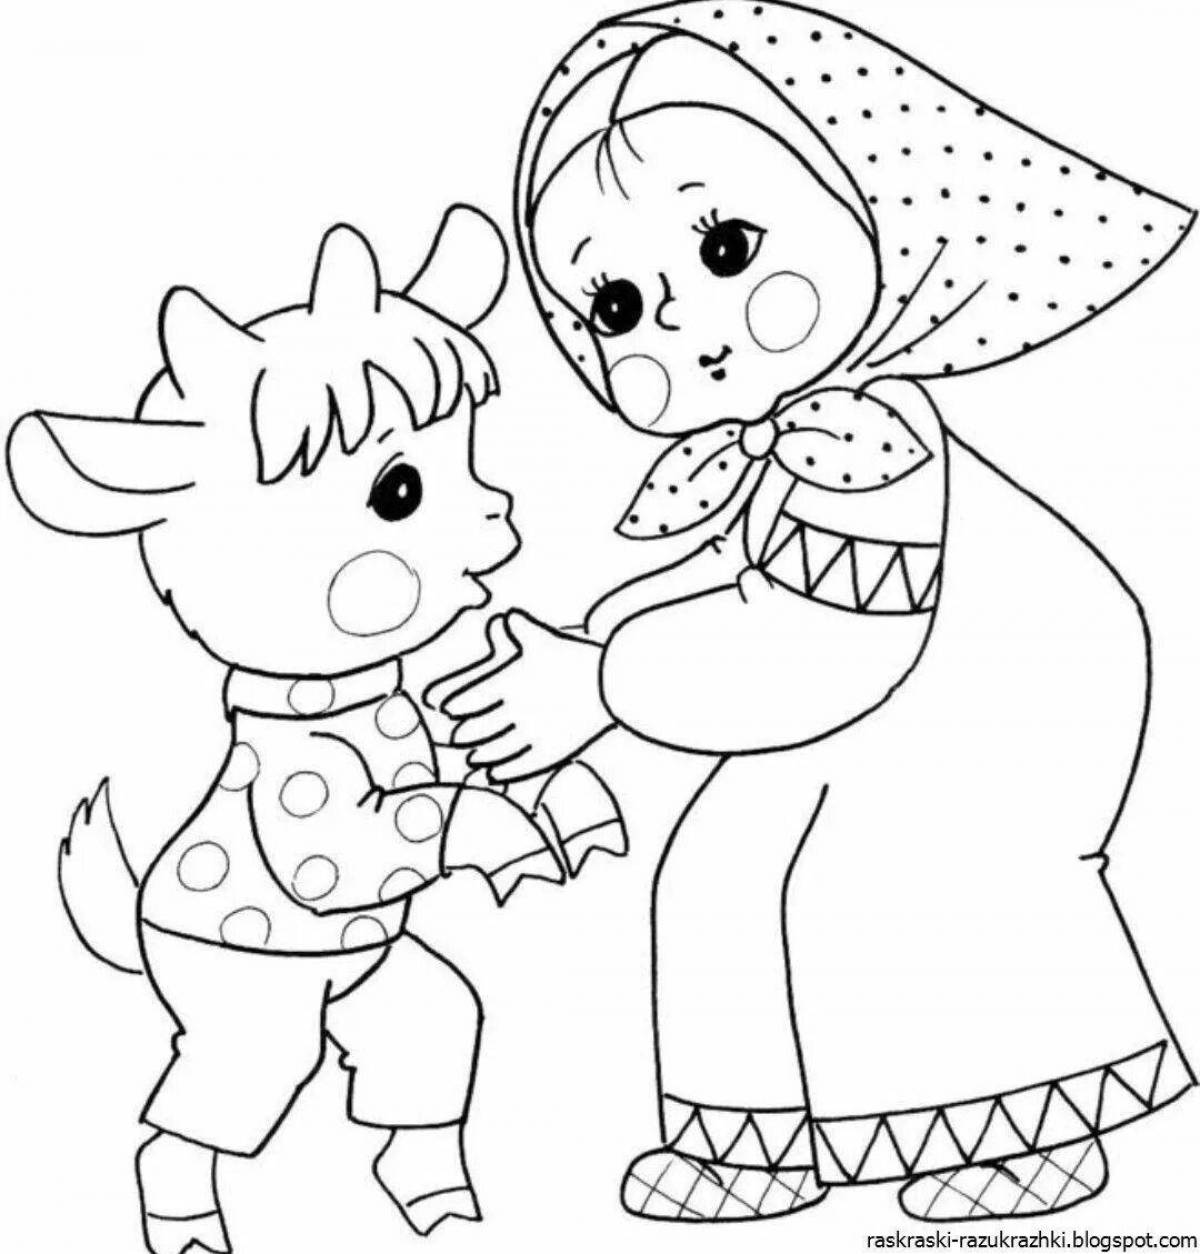 Fairy tale coloring book for children Russian folk